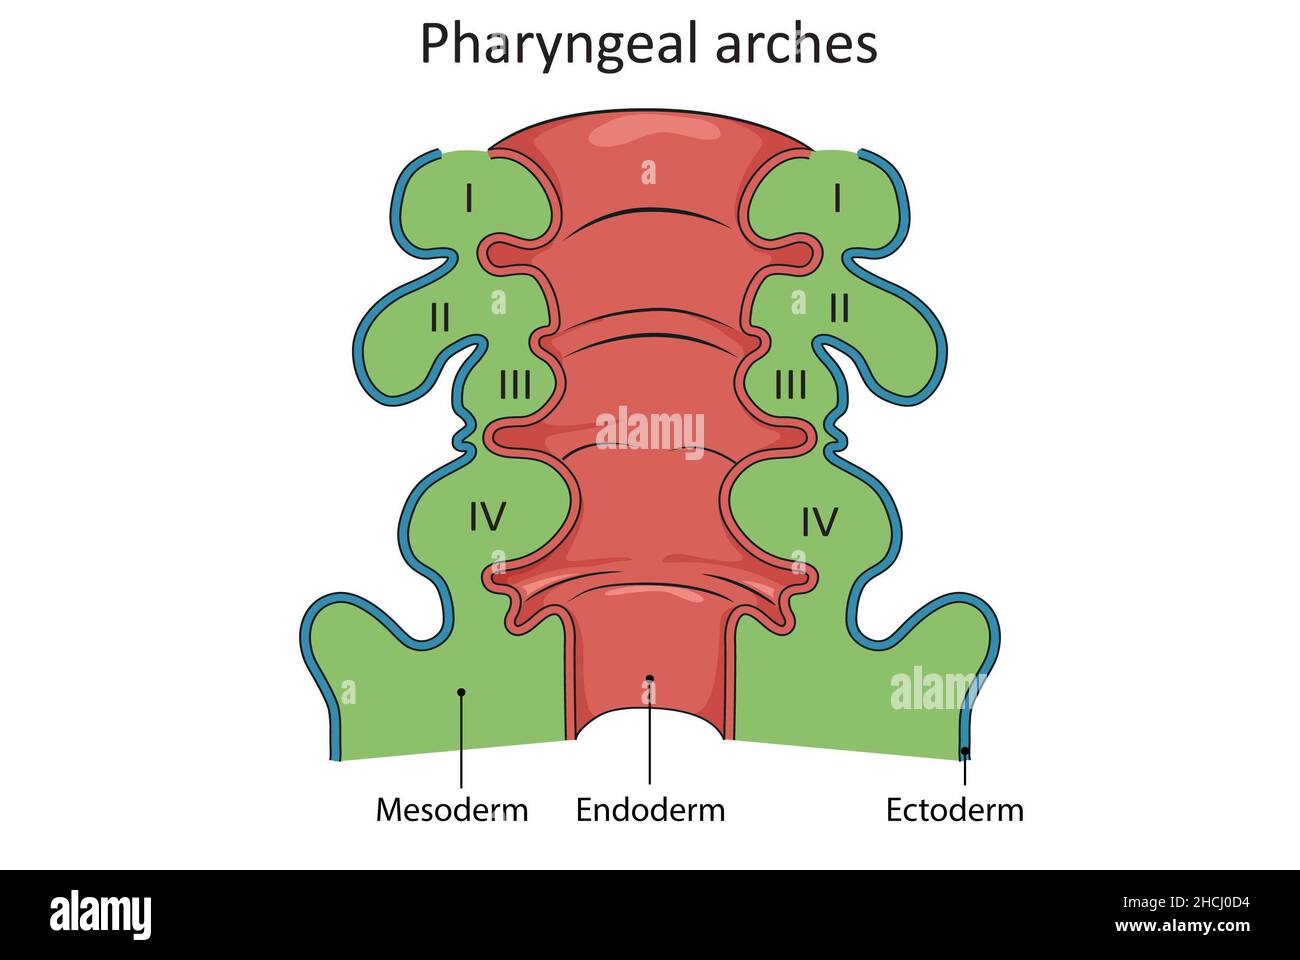 Pharyngeal arches development and embryology Stock Photo